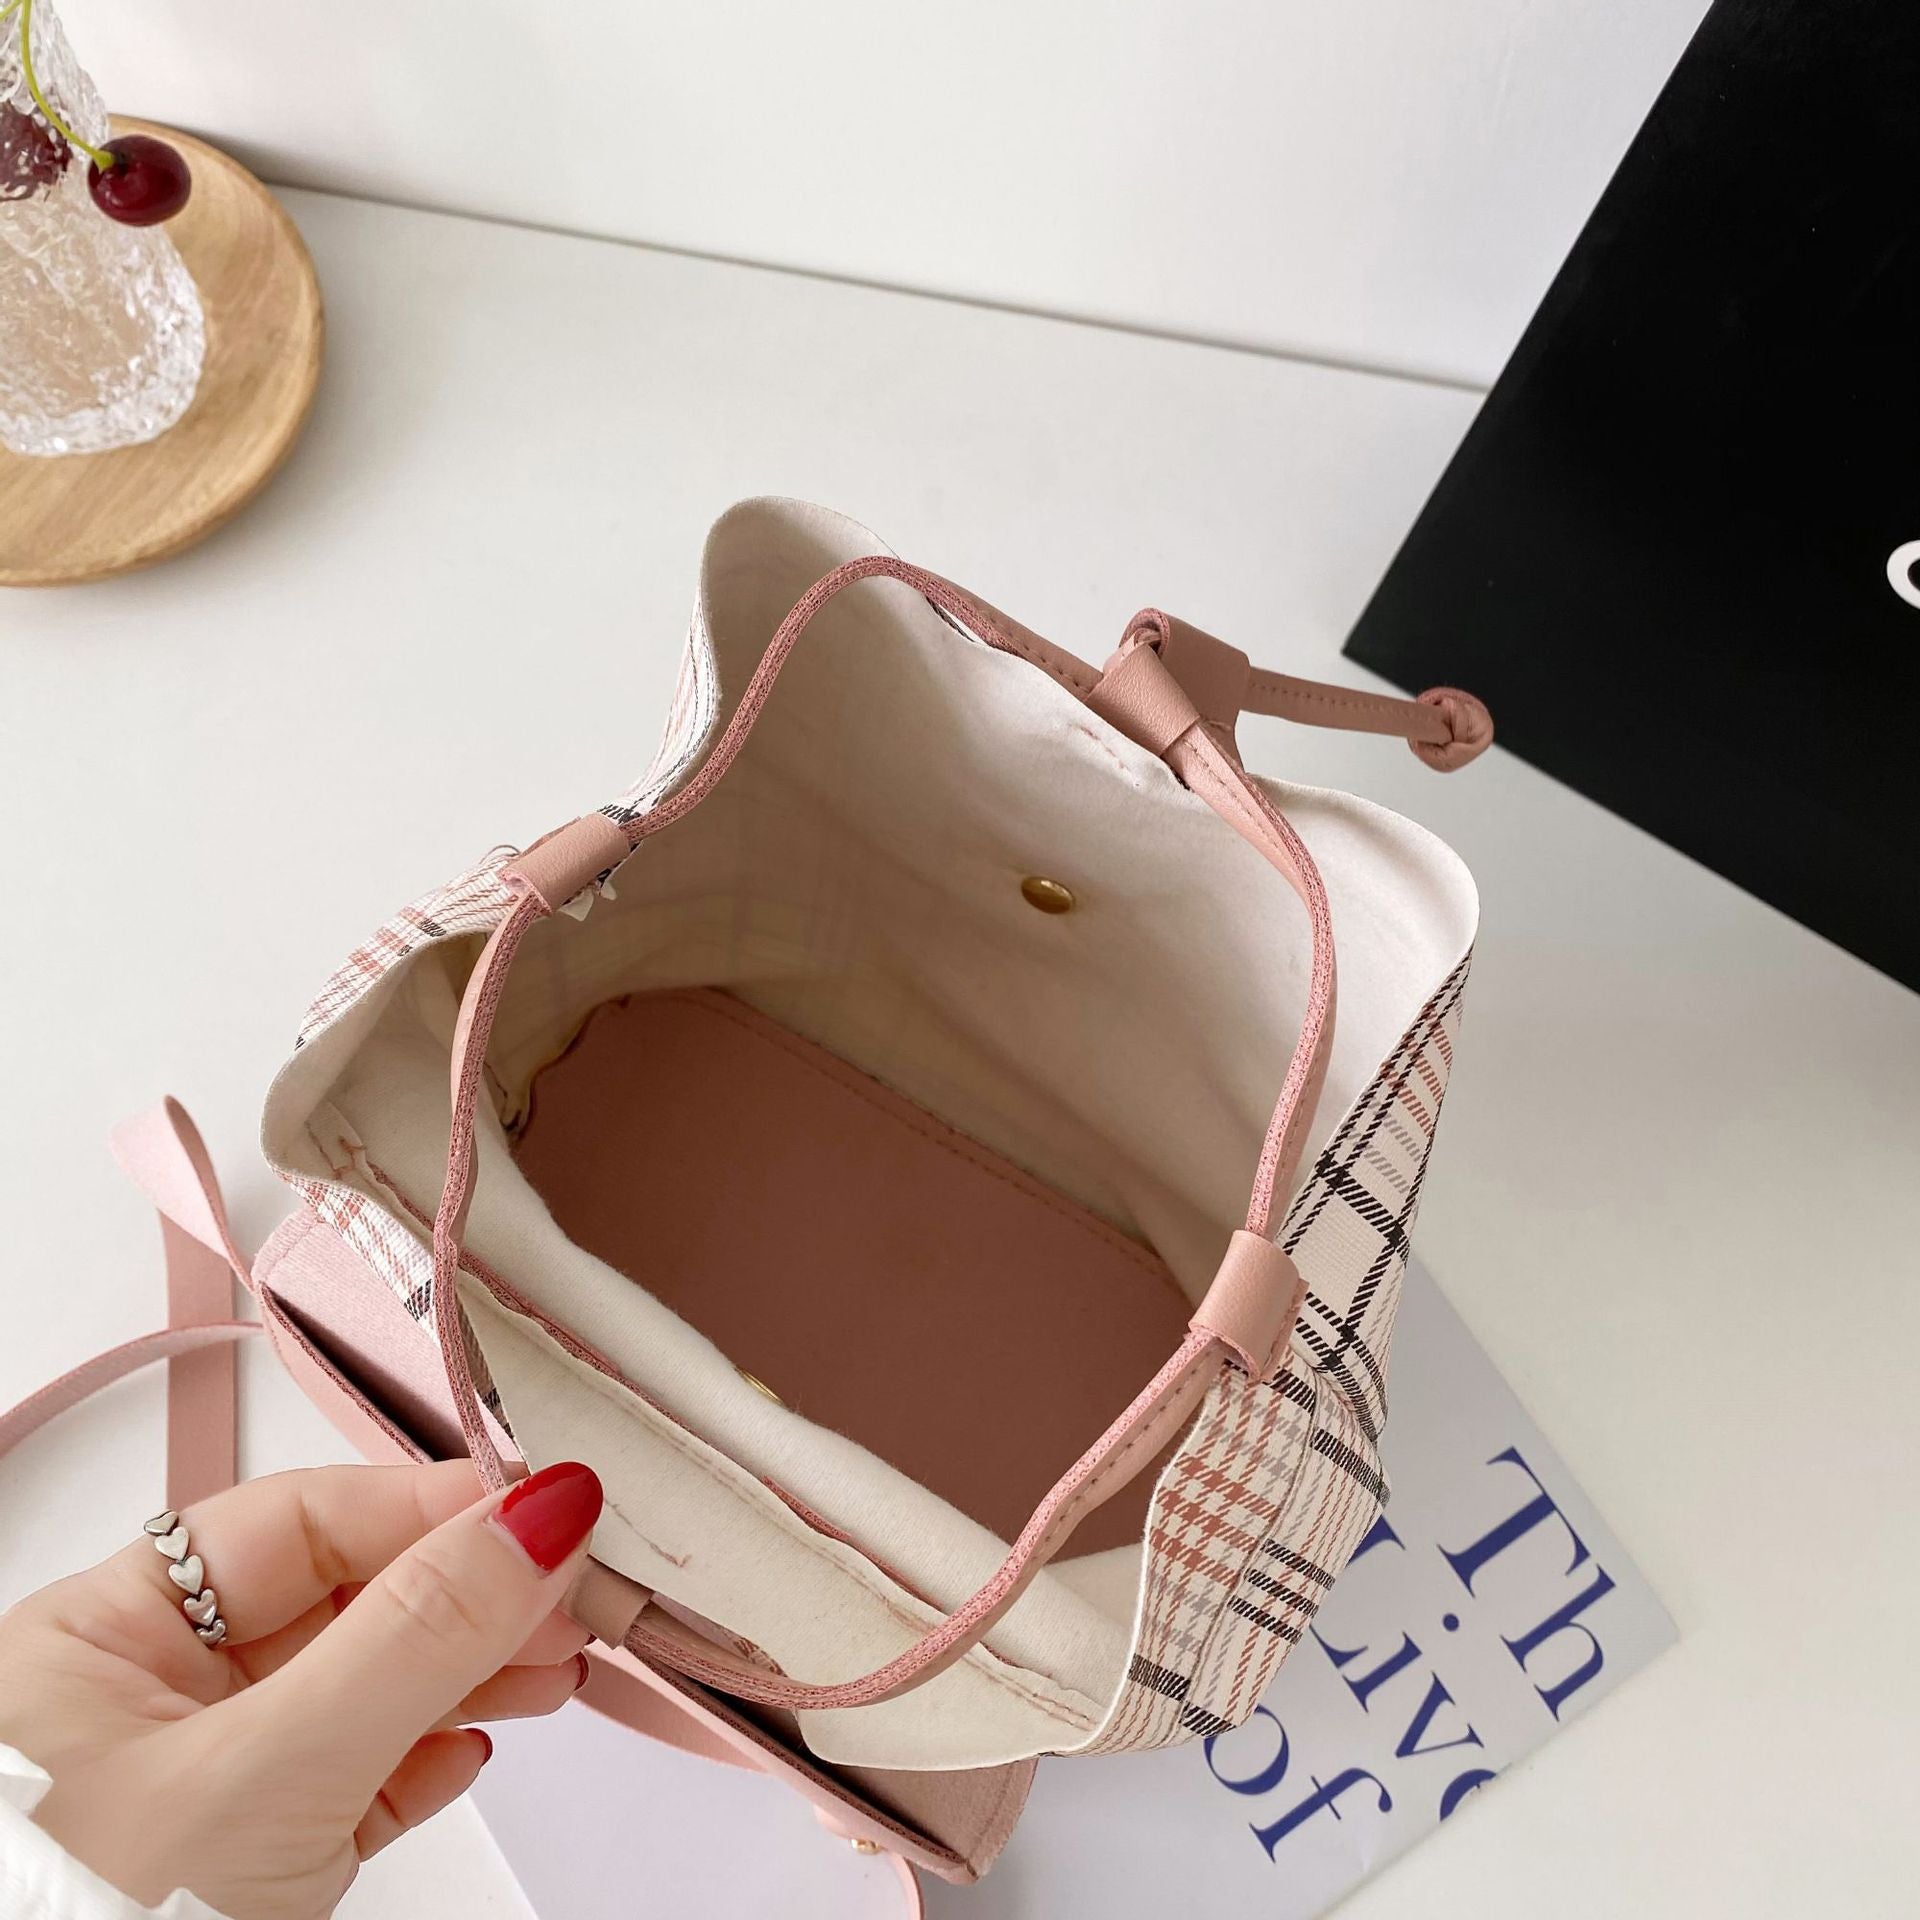 Mini Plaid Backpack, Women's Cute Backpacks Trendy Mini Faux Leather Bags With Letter Decor (9.06*8.27*4.27)inch